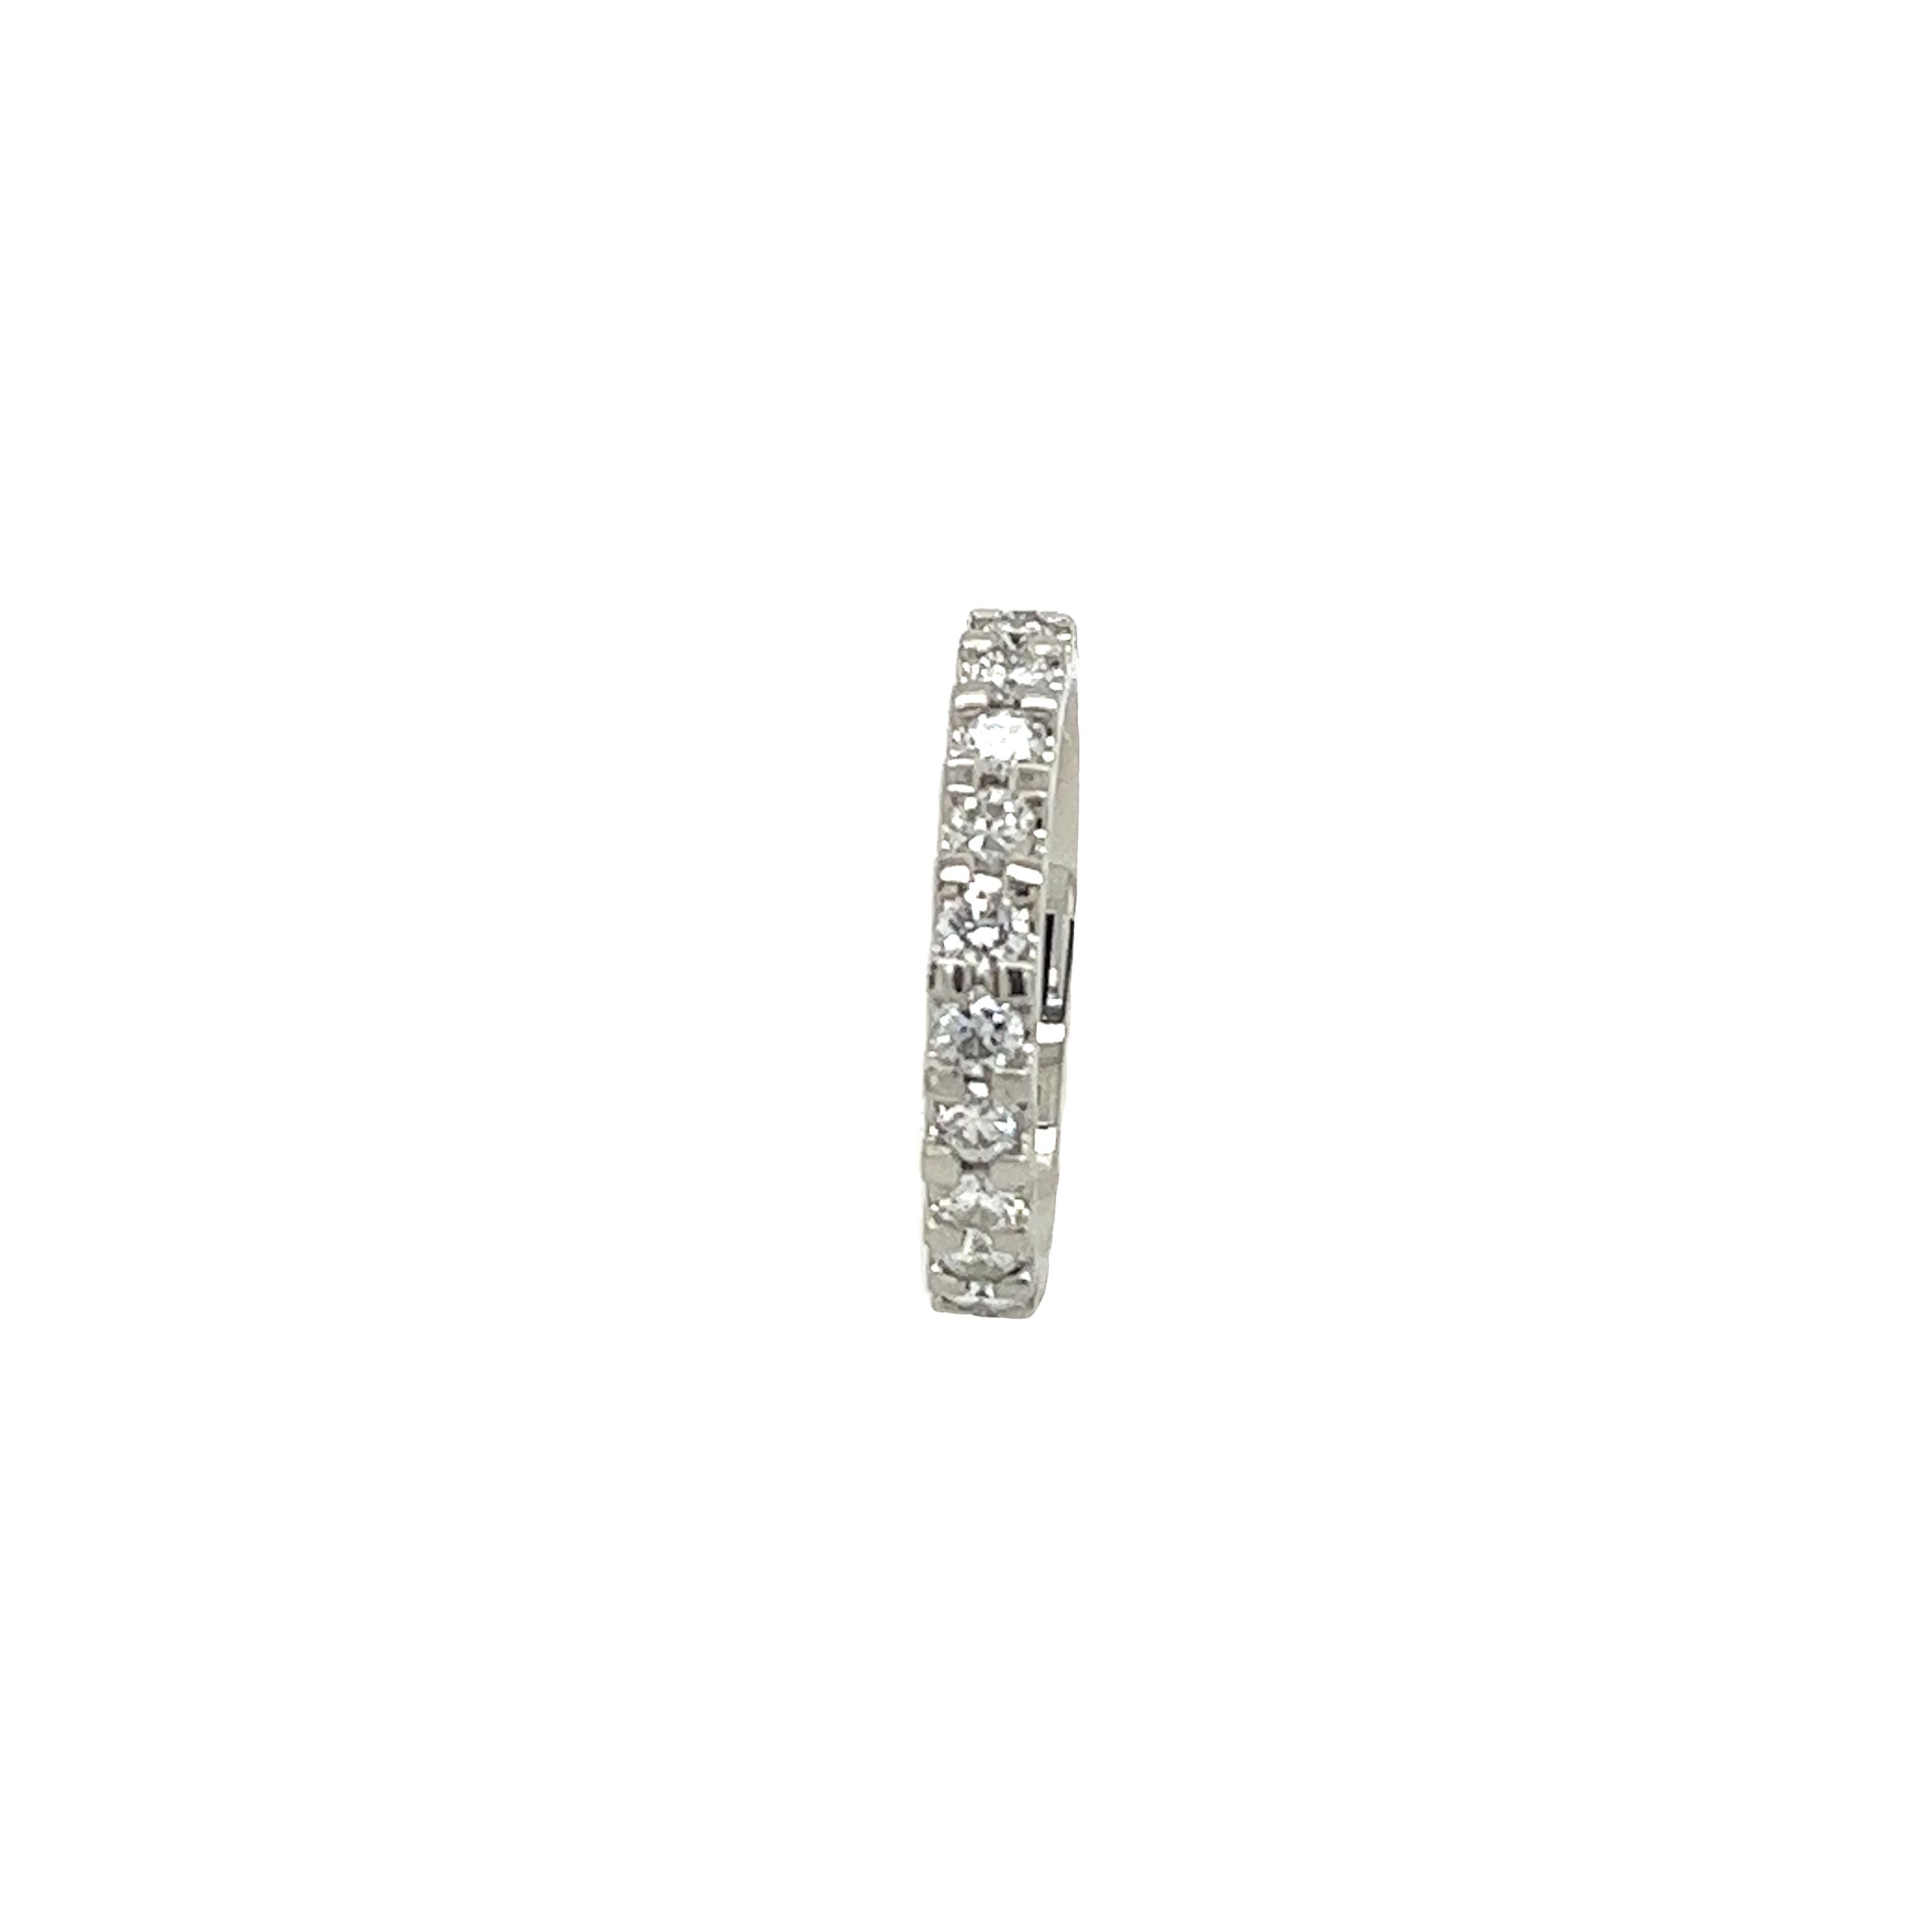 A simple and elegant design with stunning 1.30ct of natural round cut
diamonds, this platinum ring is perfect for 
a wedding band or as an eternity ring. 

Total Diamond Weight: 1.30ct
Diamond Colour: H
Diamond Clarity: SI1
Width of Band: